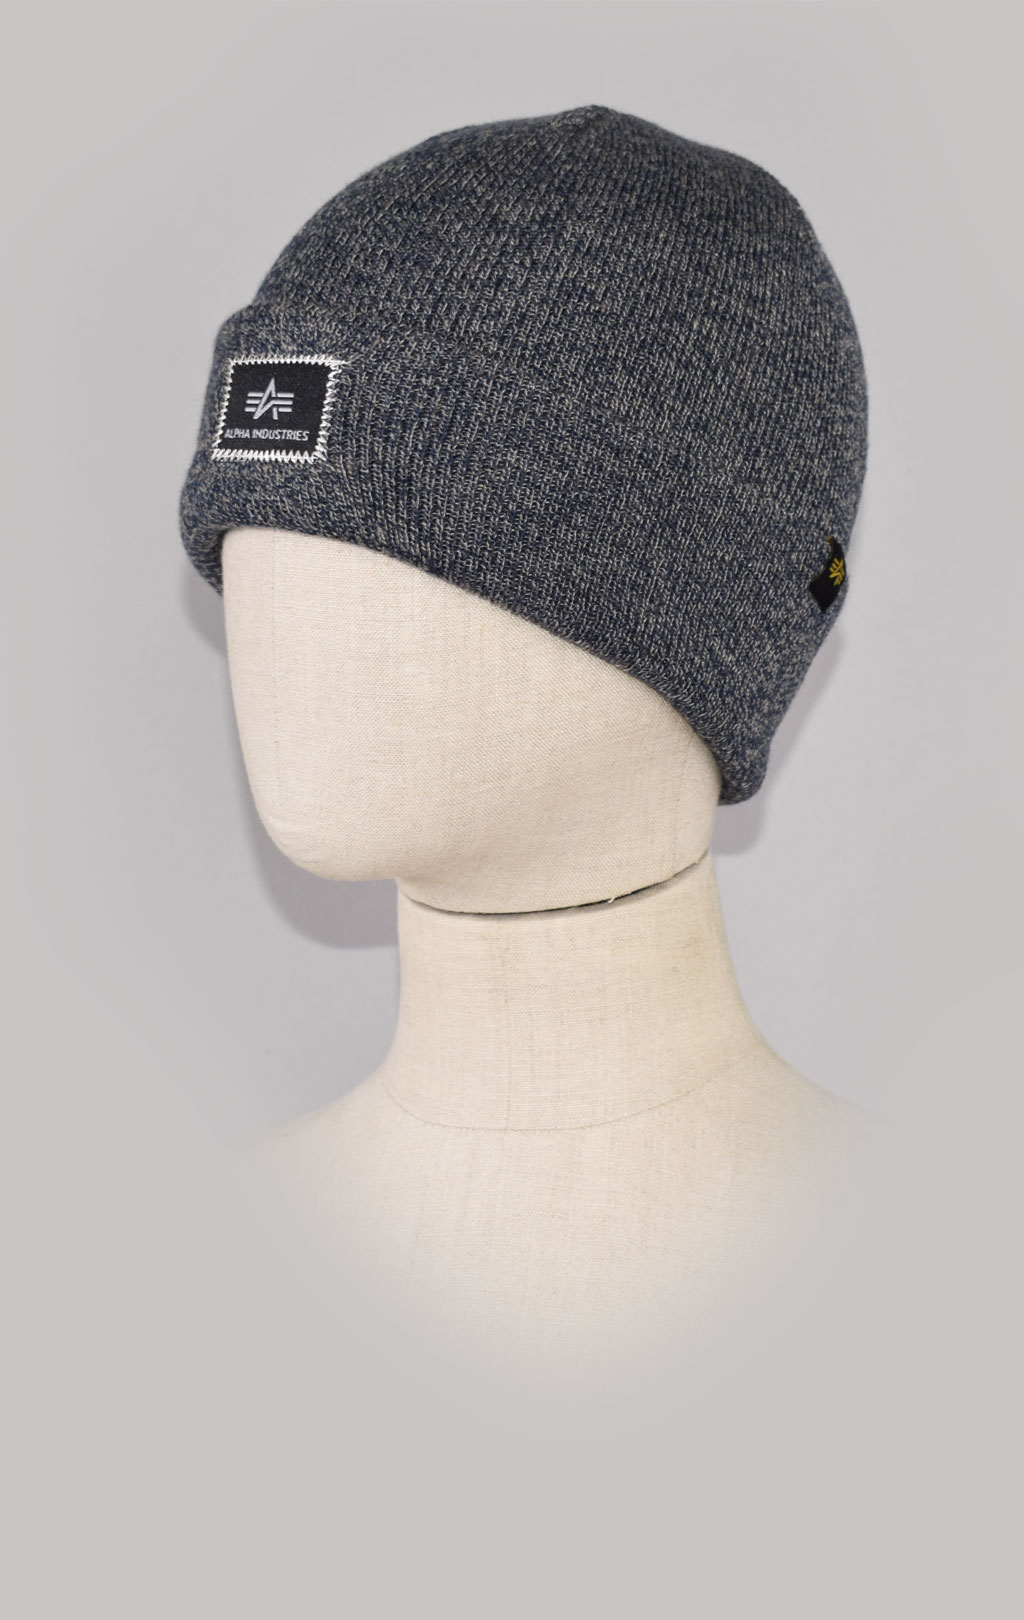 Шапка ALPHA INDUSTRIES X-FIT BEANIE charcoal heather 